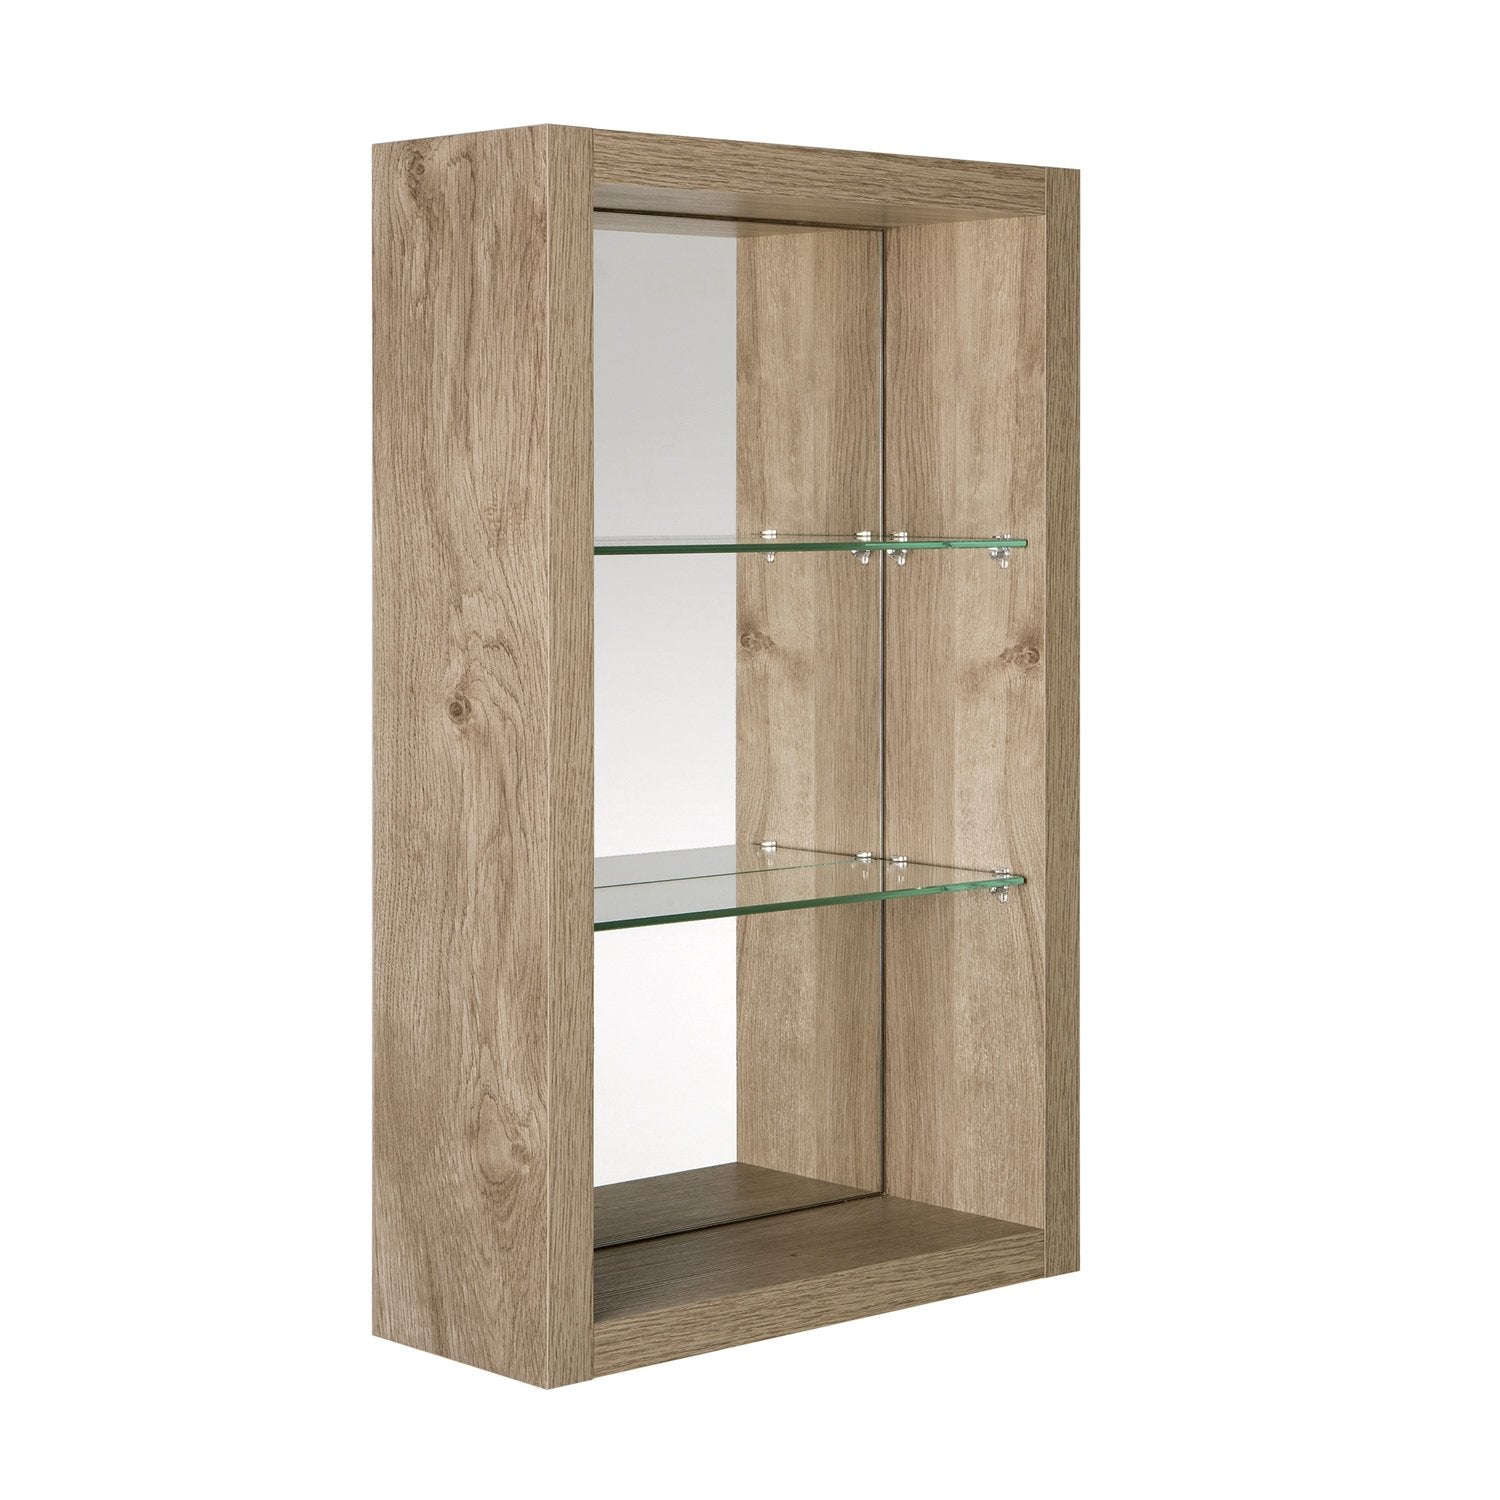 16" Open Side Cabinet with Shelves and Mirror, Wall Mount, Oak, Serie Tino by VALENZUELA